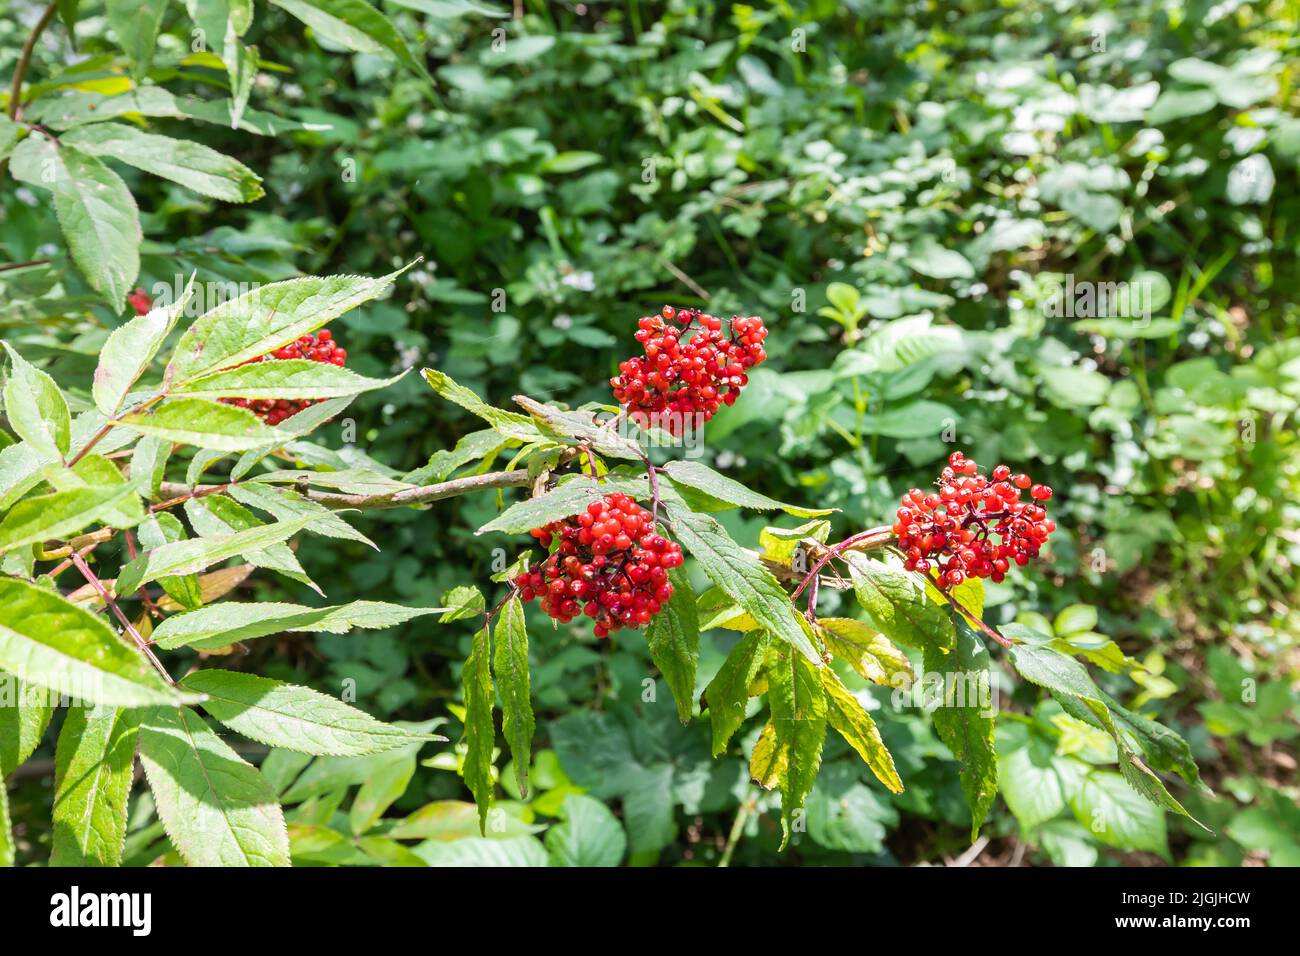 Close up of a Red-berried Elder, Sambucus racemosa, standing in forest edge with fresh green compound leaves and clusters of bright red colored berrie Stock Photo